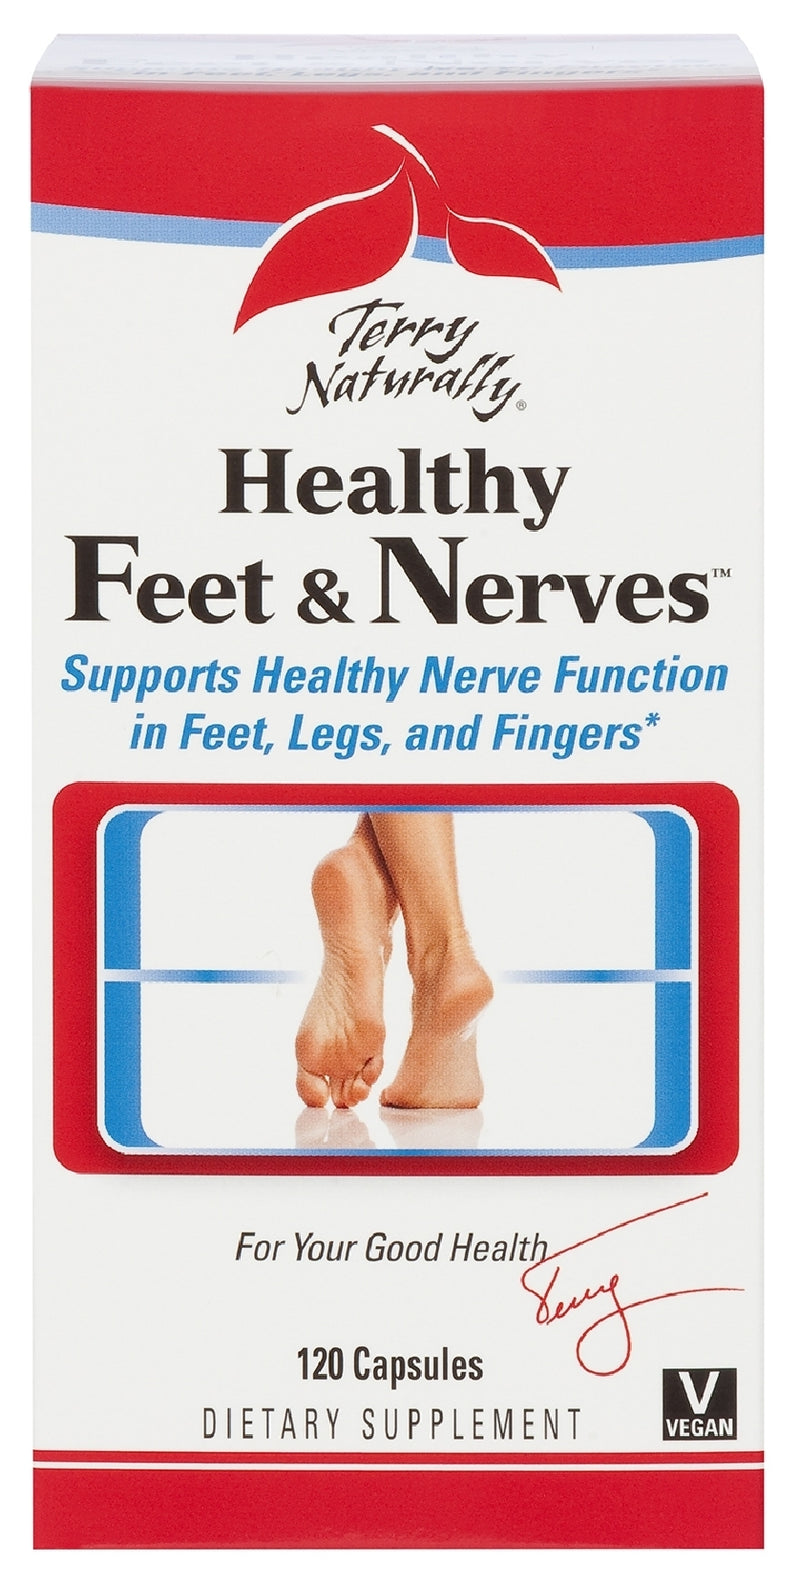 Terry Naturally Healthy Feet & Nerves 120 Capsules